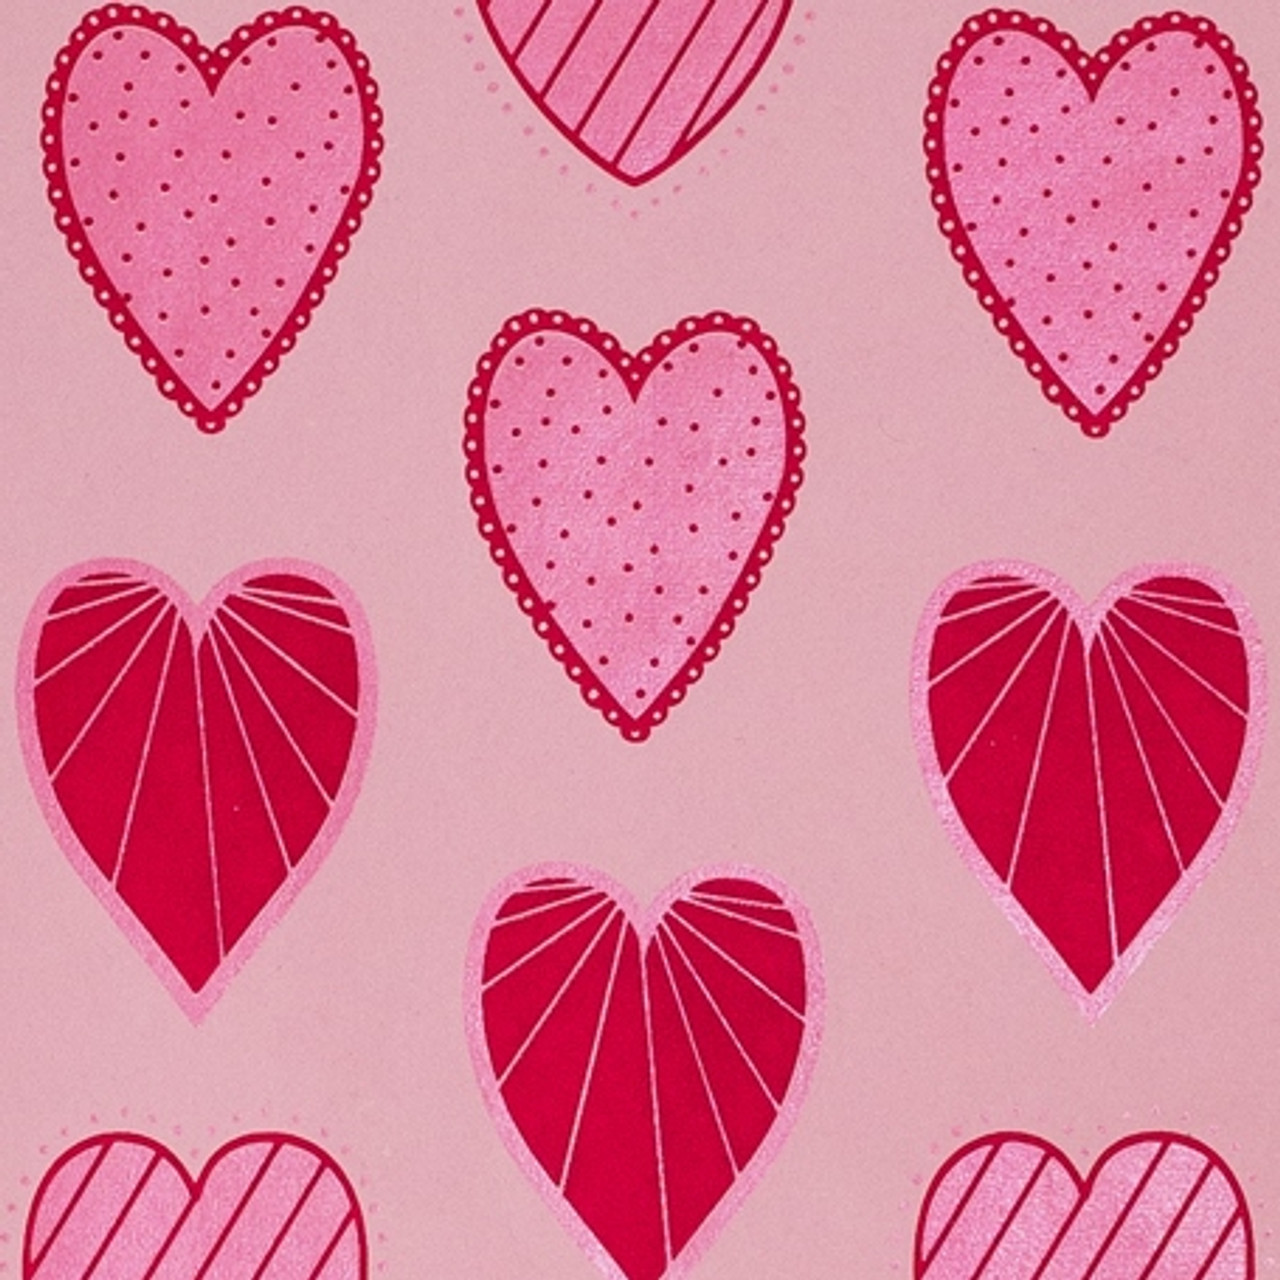 24-in x 100-ft Red And White Hearts Valentines Gift Wrap (E1260)